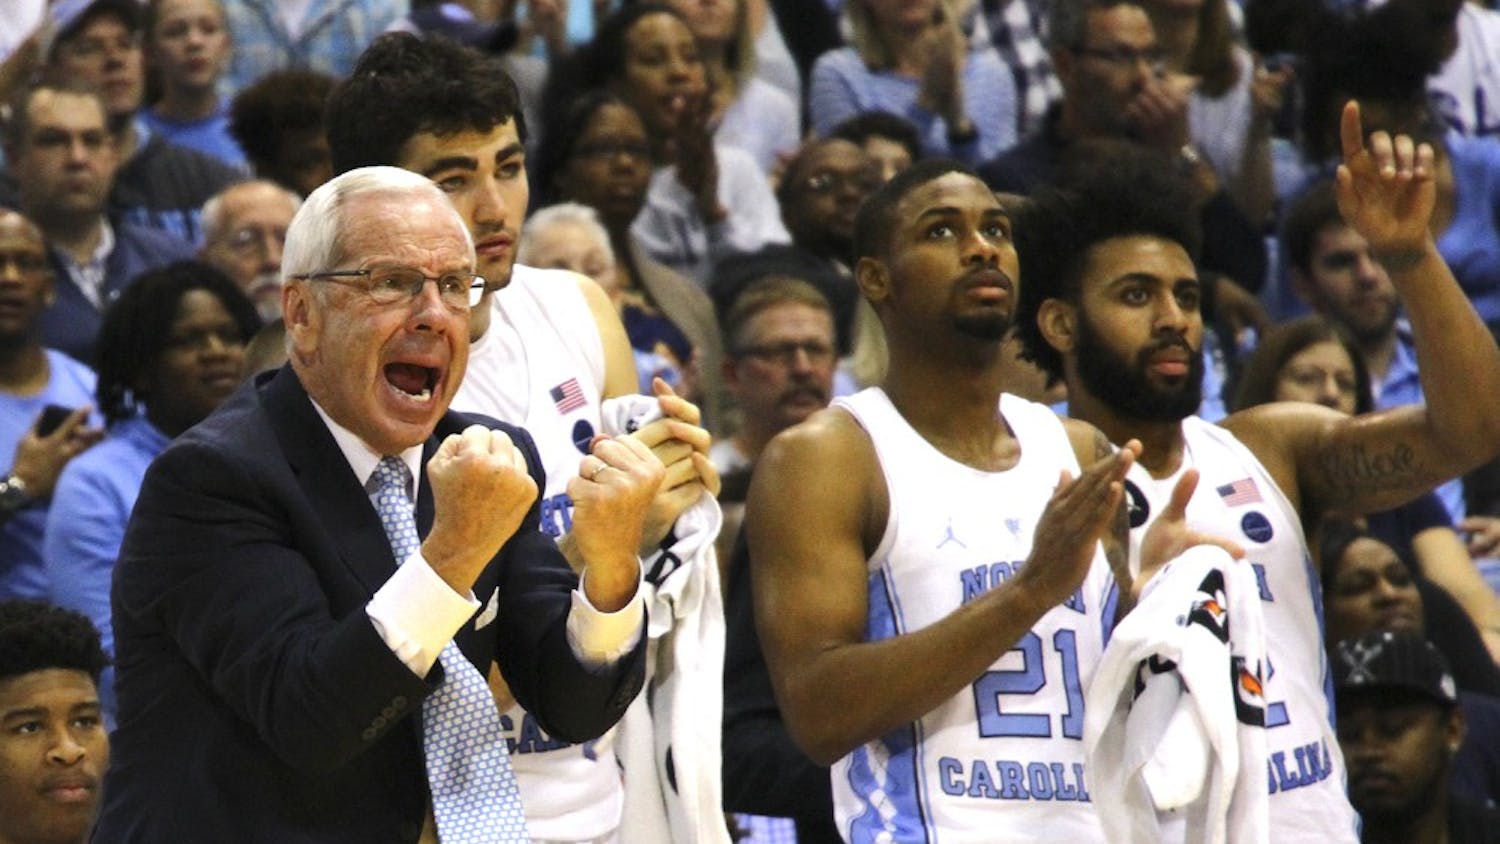 Roy Williams shouts from the bench during Saturday's game against Florida State.